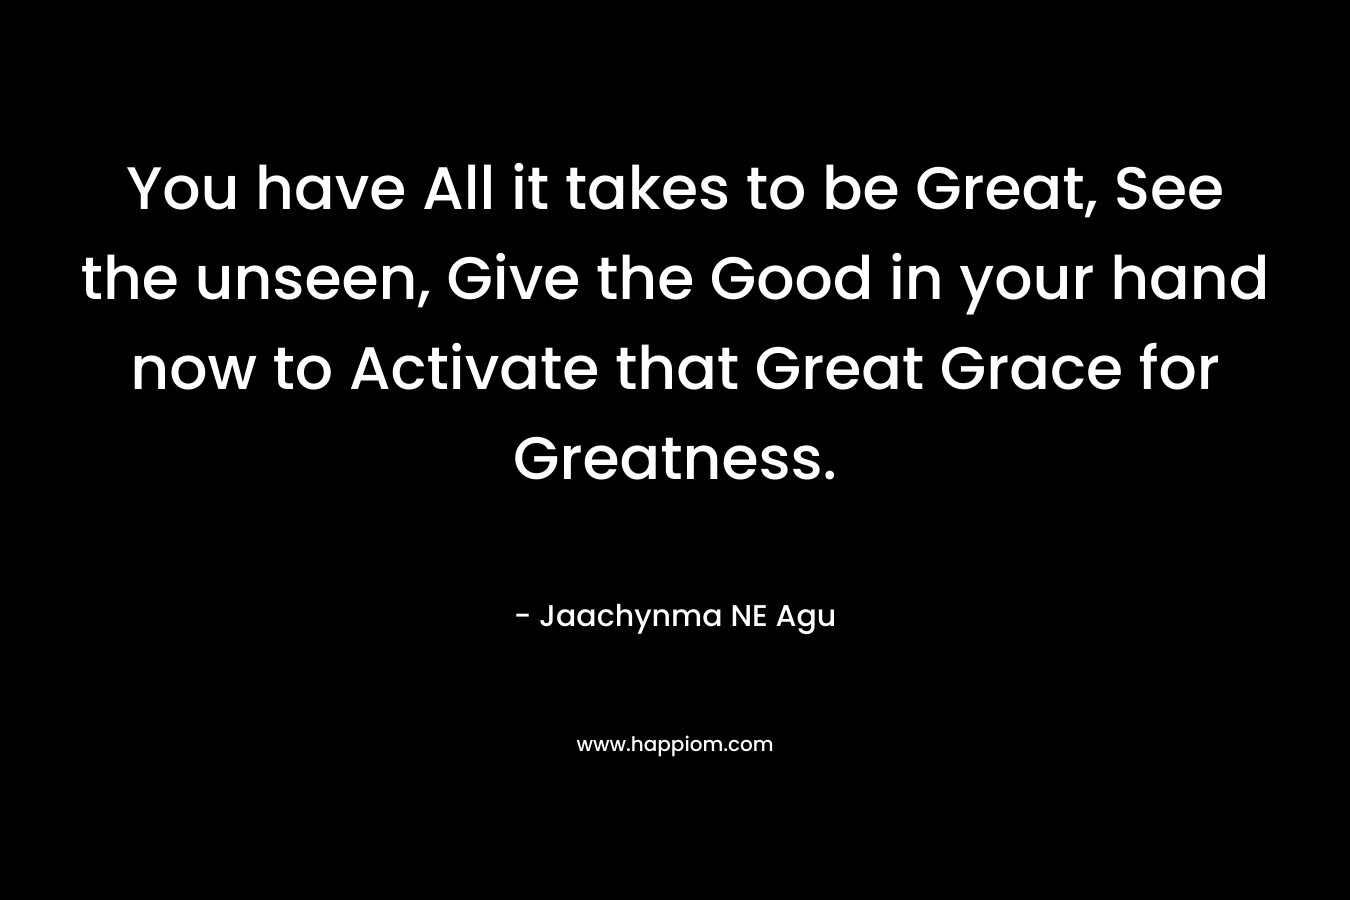 You have All it takes to be Great, See the unseen, Give the Good in your hand now to Activate that Great Grace for Greatness.